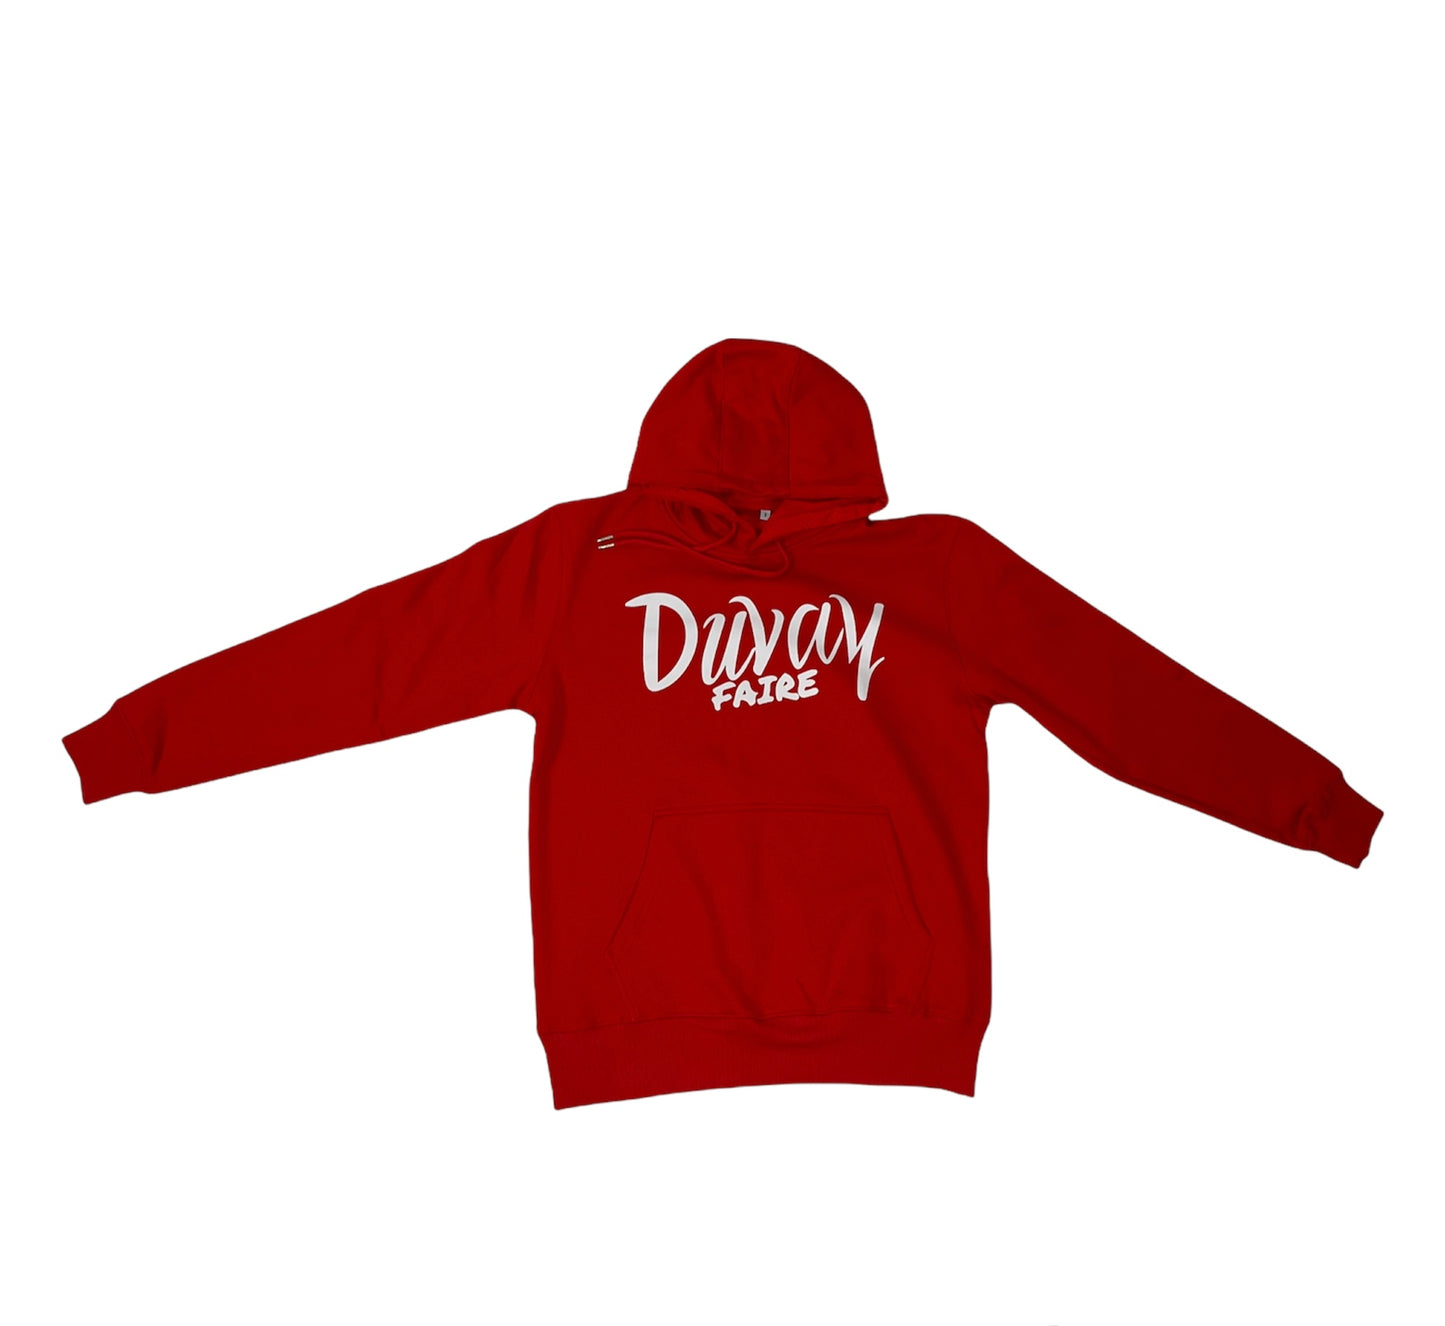 Red "Holiday Romance" Hoodie